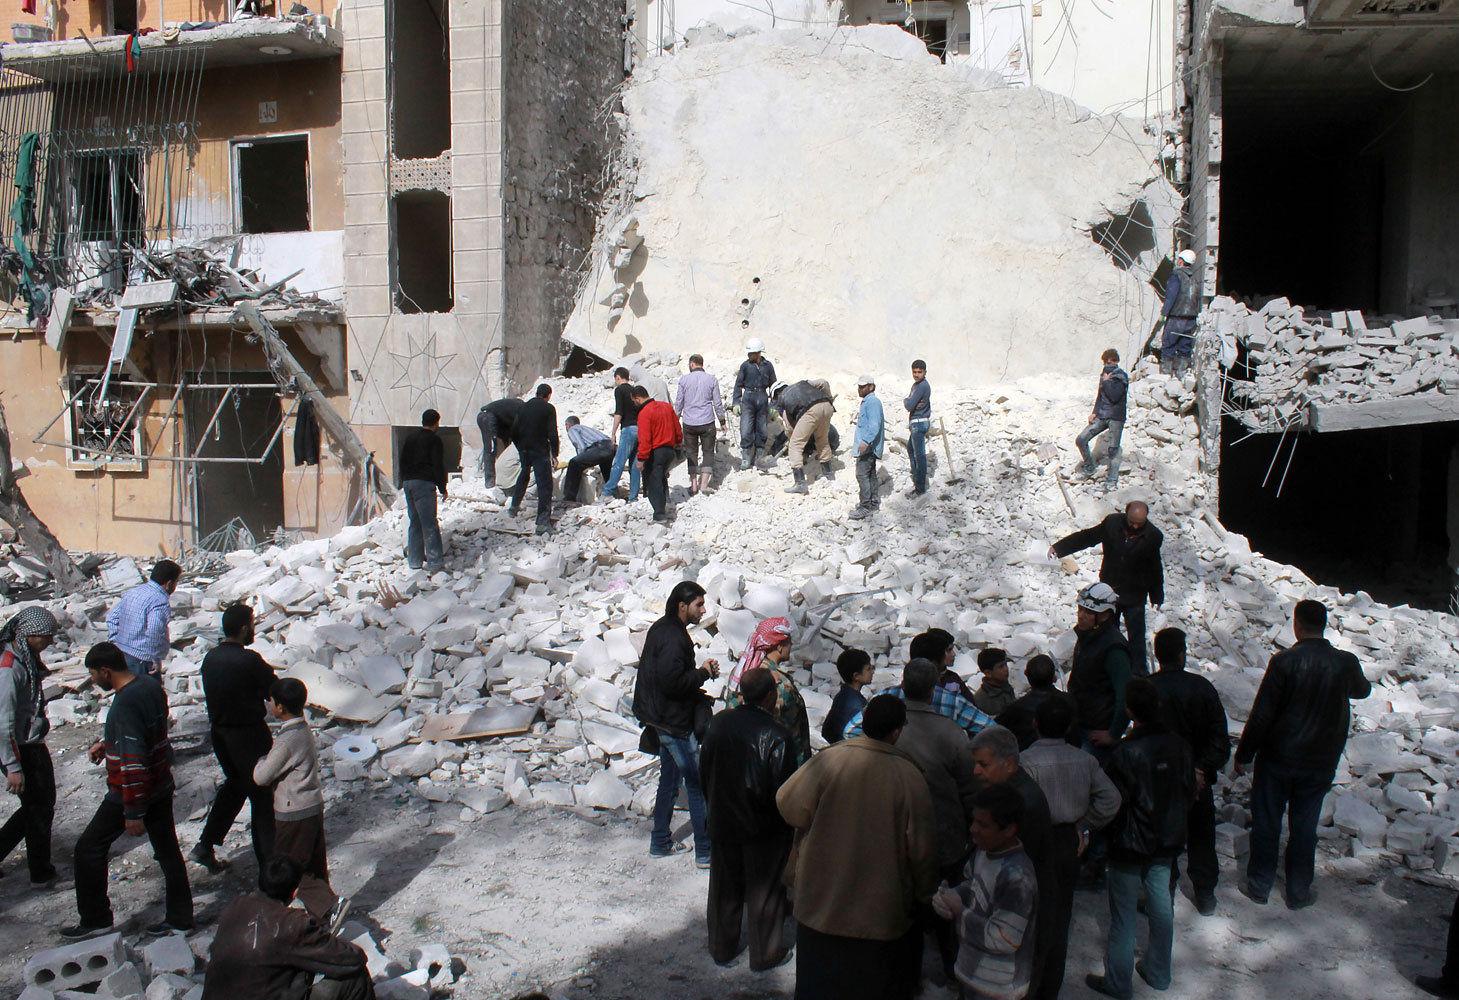 Syrians look at the destruction following an airstrike by government forces on the northern Syrian city of Aleppo on March 5, 2014. (Baraa Al-Halabi—AFP/Getty Images)